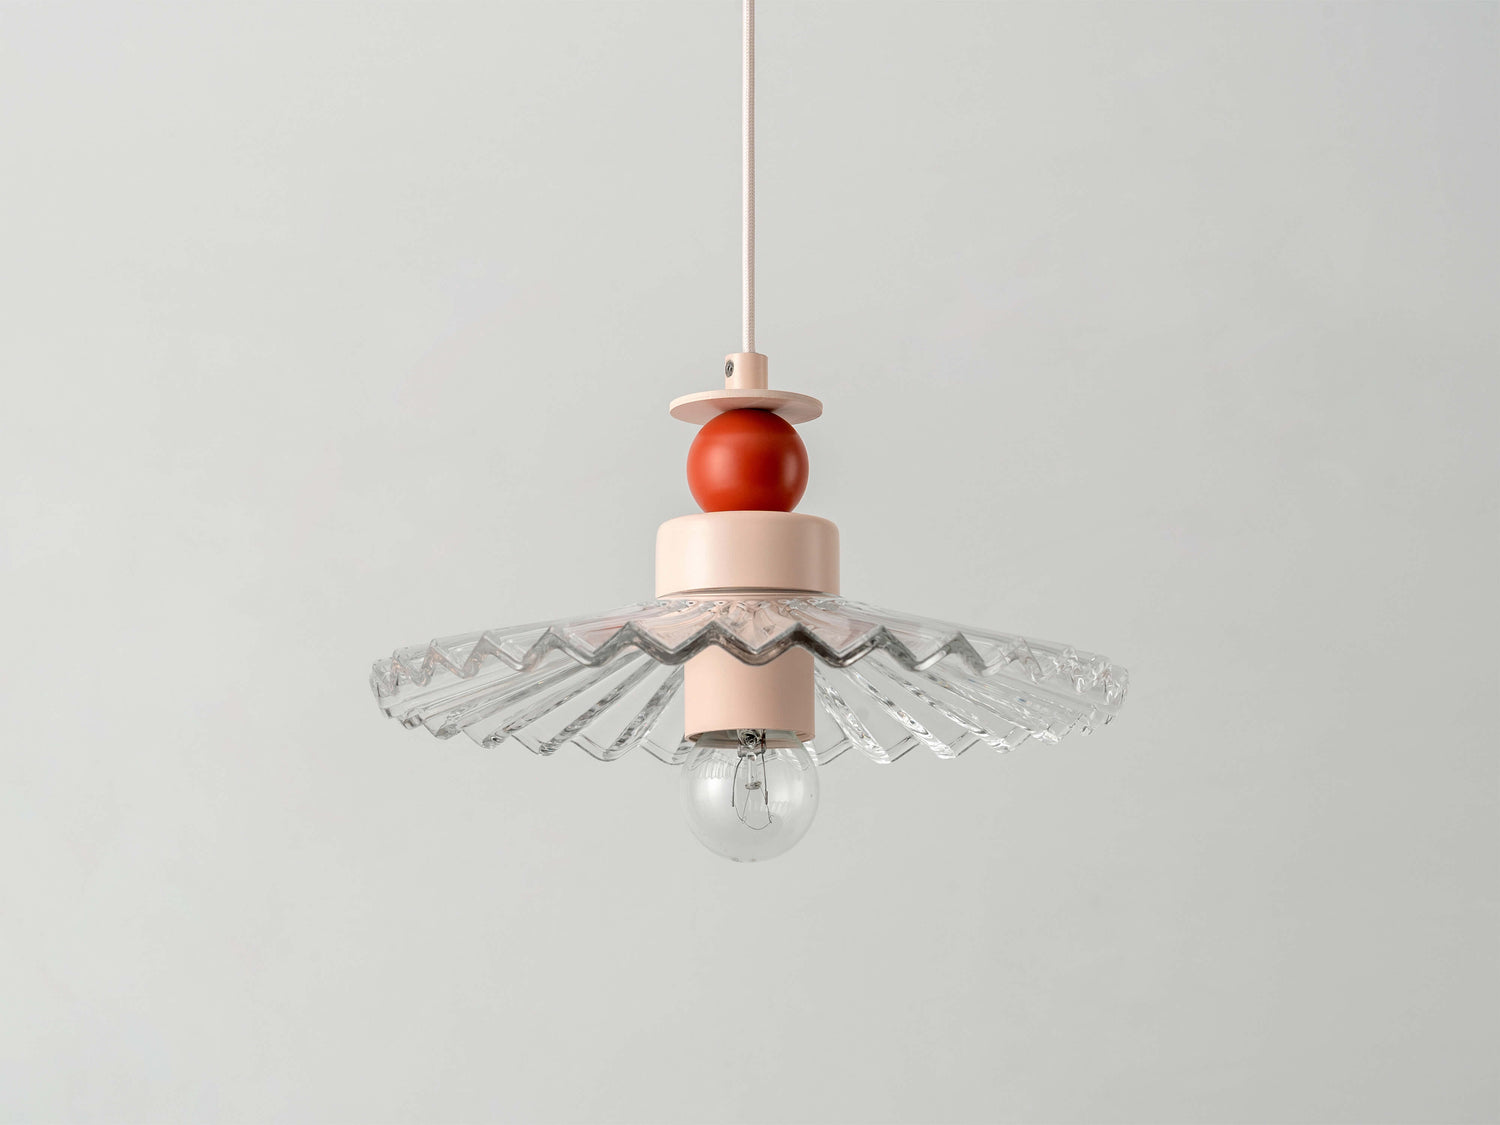 The Ribbed pendant ceiling light